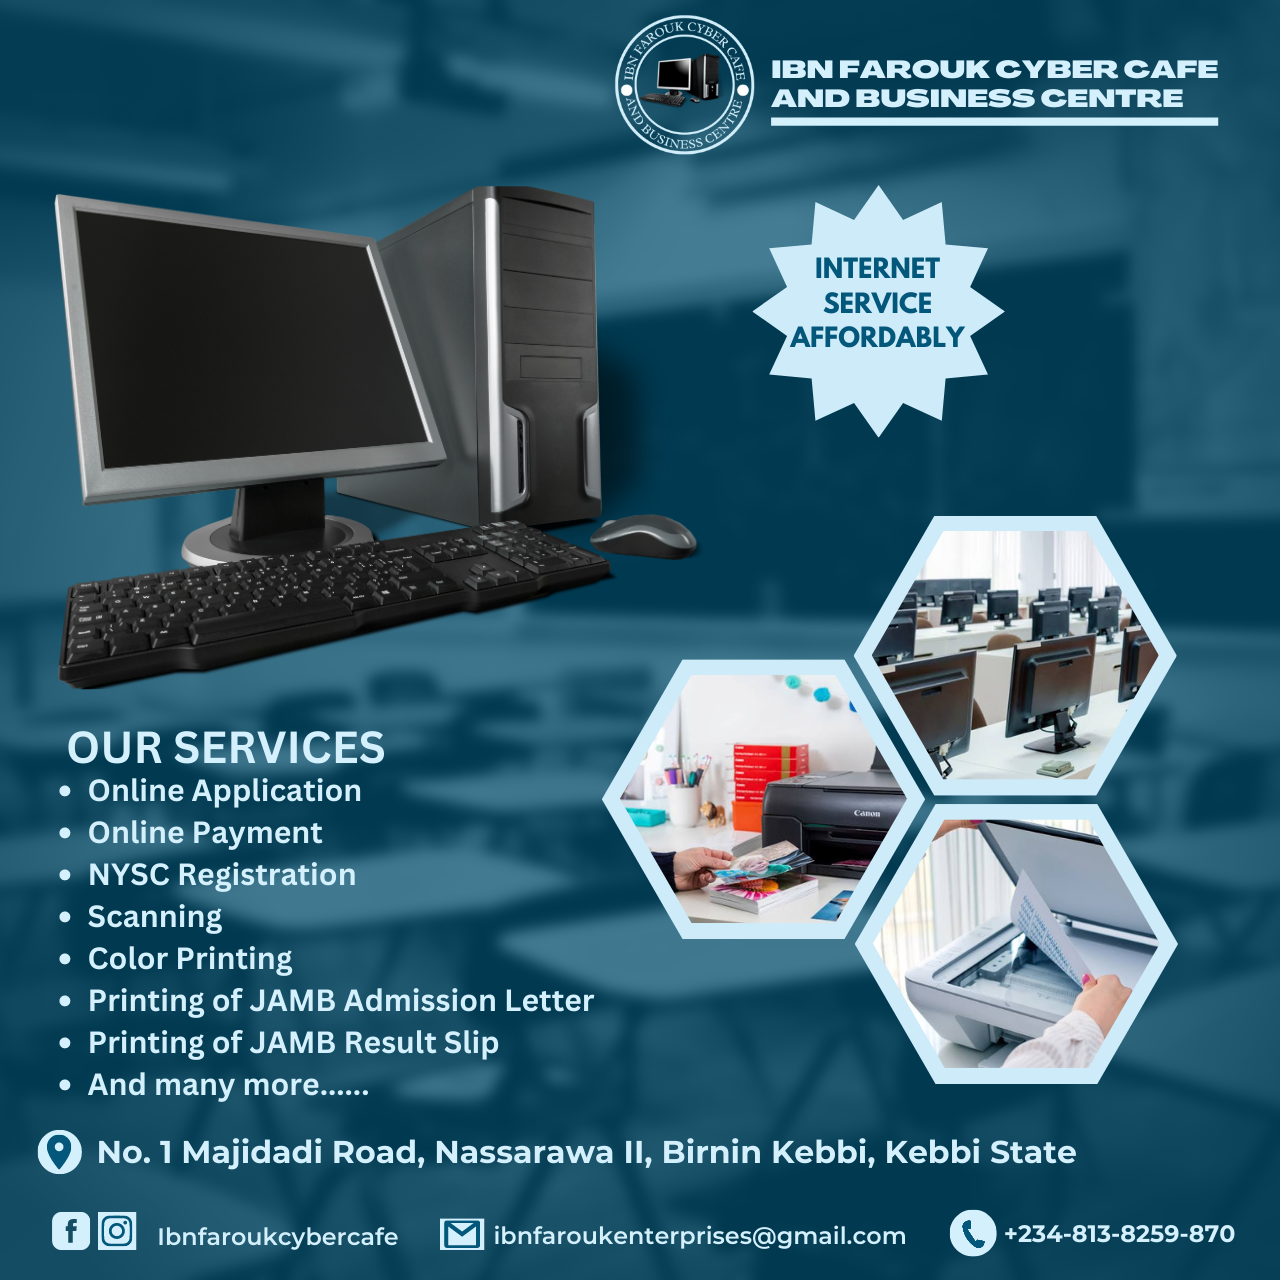 IBN FAROUK CYBER CAFÉ AND BUSINESS CENTRE